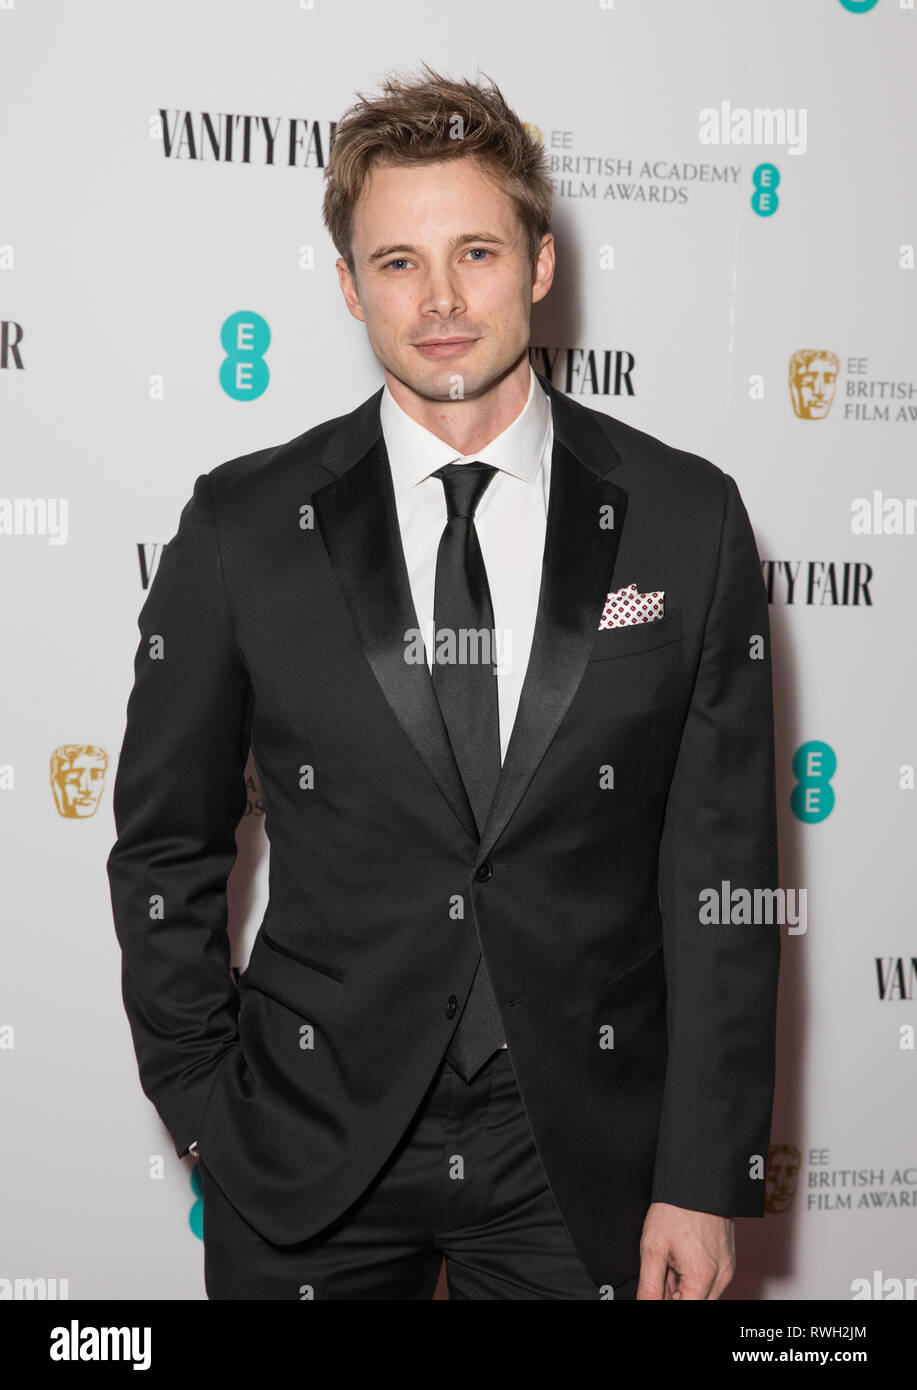 Vanity Fair EE Rising Star Party at The Baptist at L’Oscar Hotel in Holborn, London.  Featuring: Bradley James Where: London, United Kingdom When: 31 Jan 2019 Credit: Phil Lewis/WENN.com Stock Photo